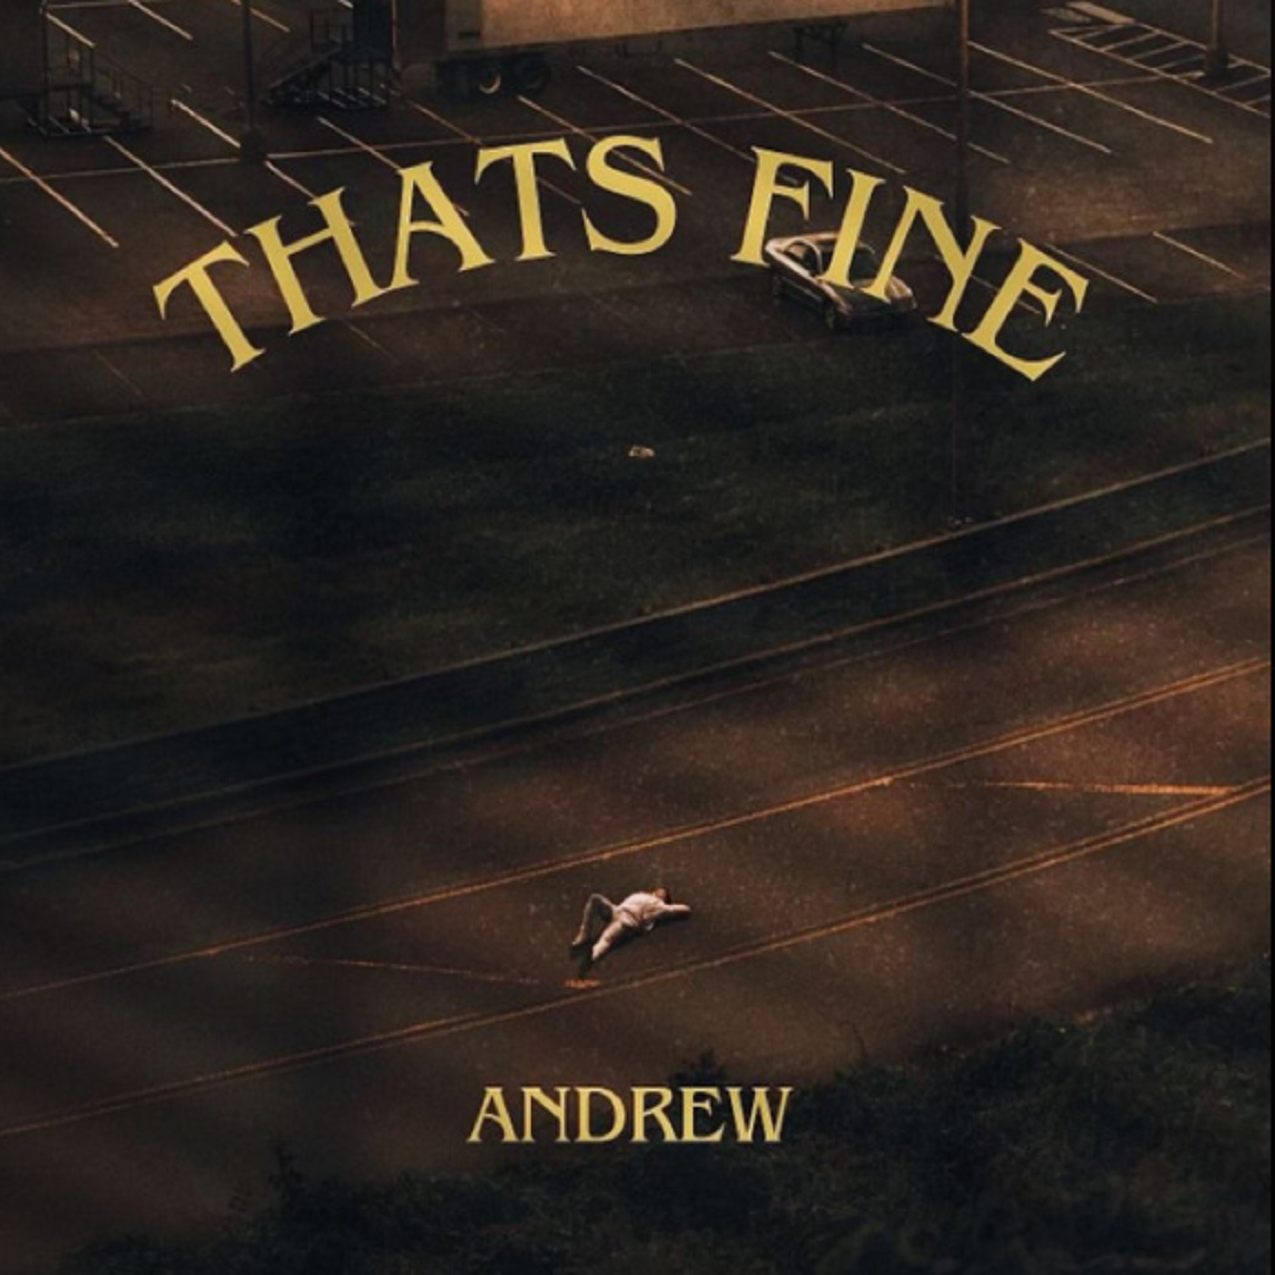 andrew showcases his latest song – Thats Fine